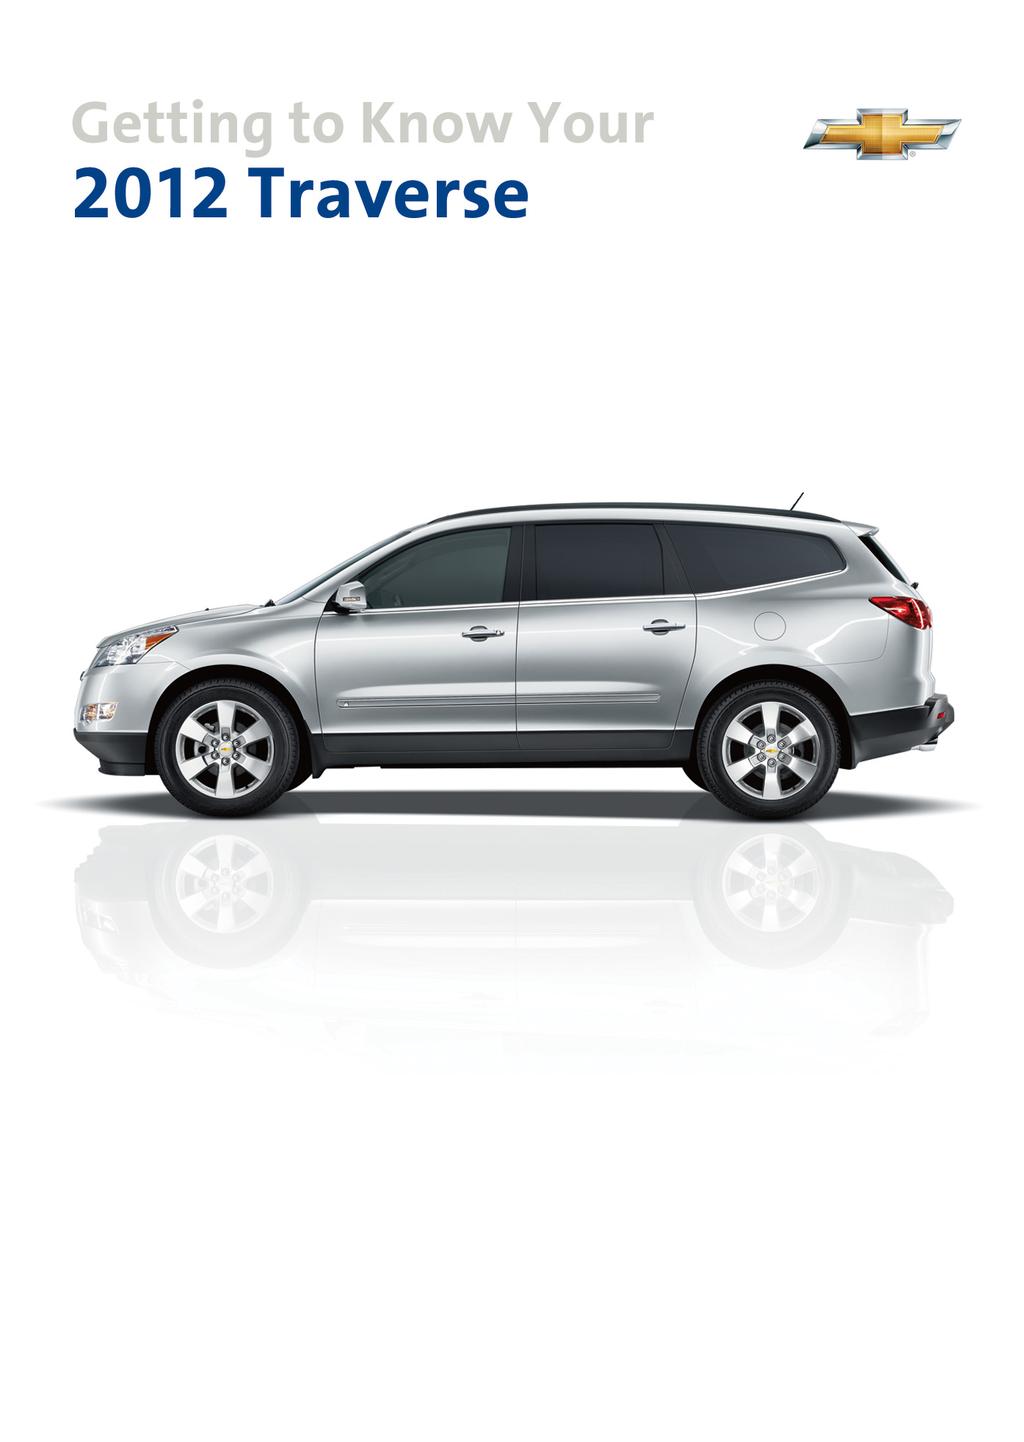 Review this Quick Reference Guide for an overview of some important features in your Chevrolet Traverse. More detailed information can be found in your Owner Manual.